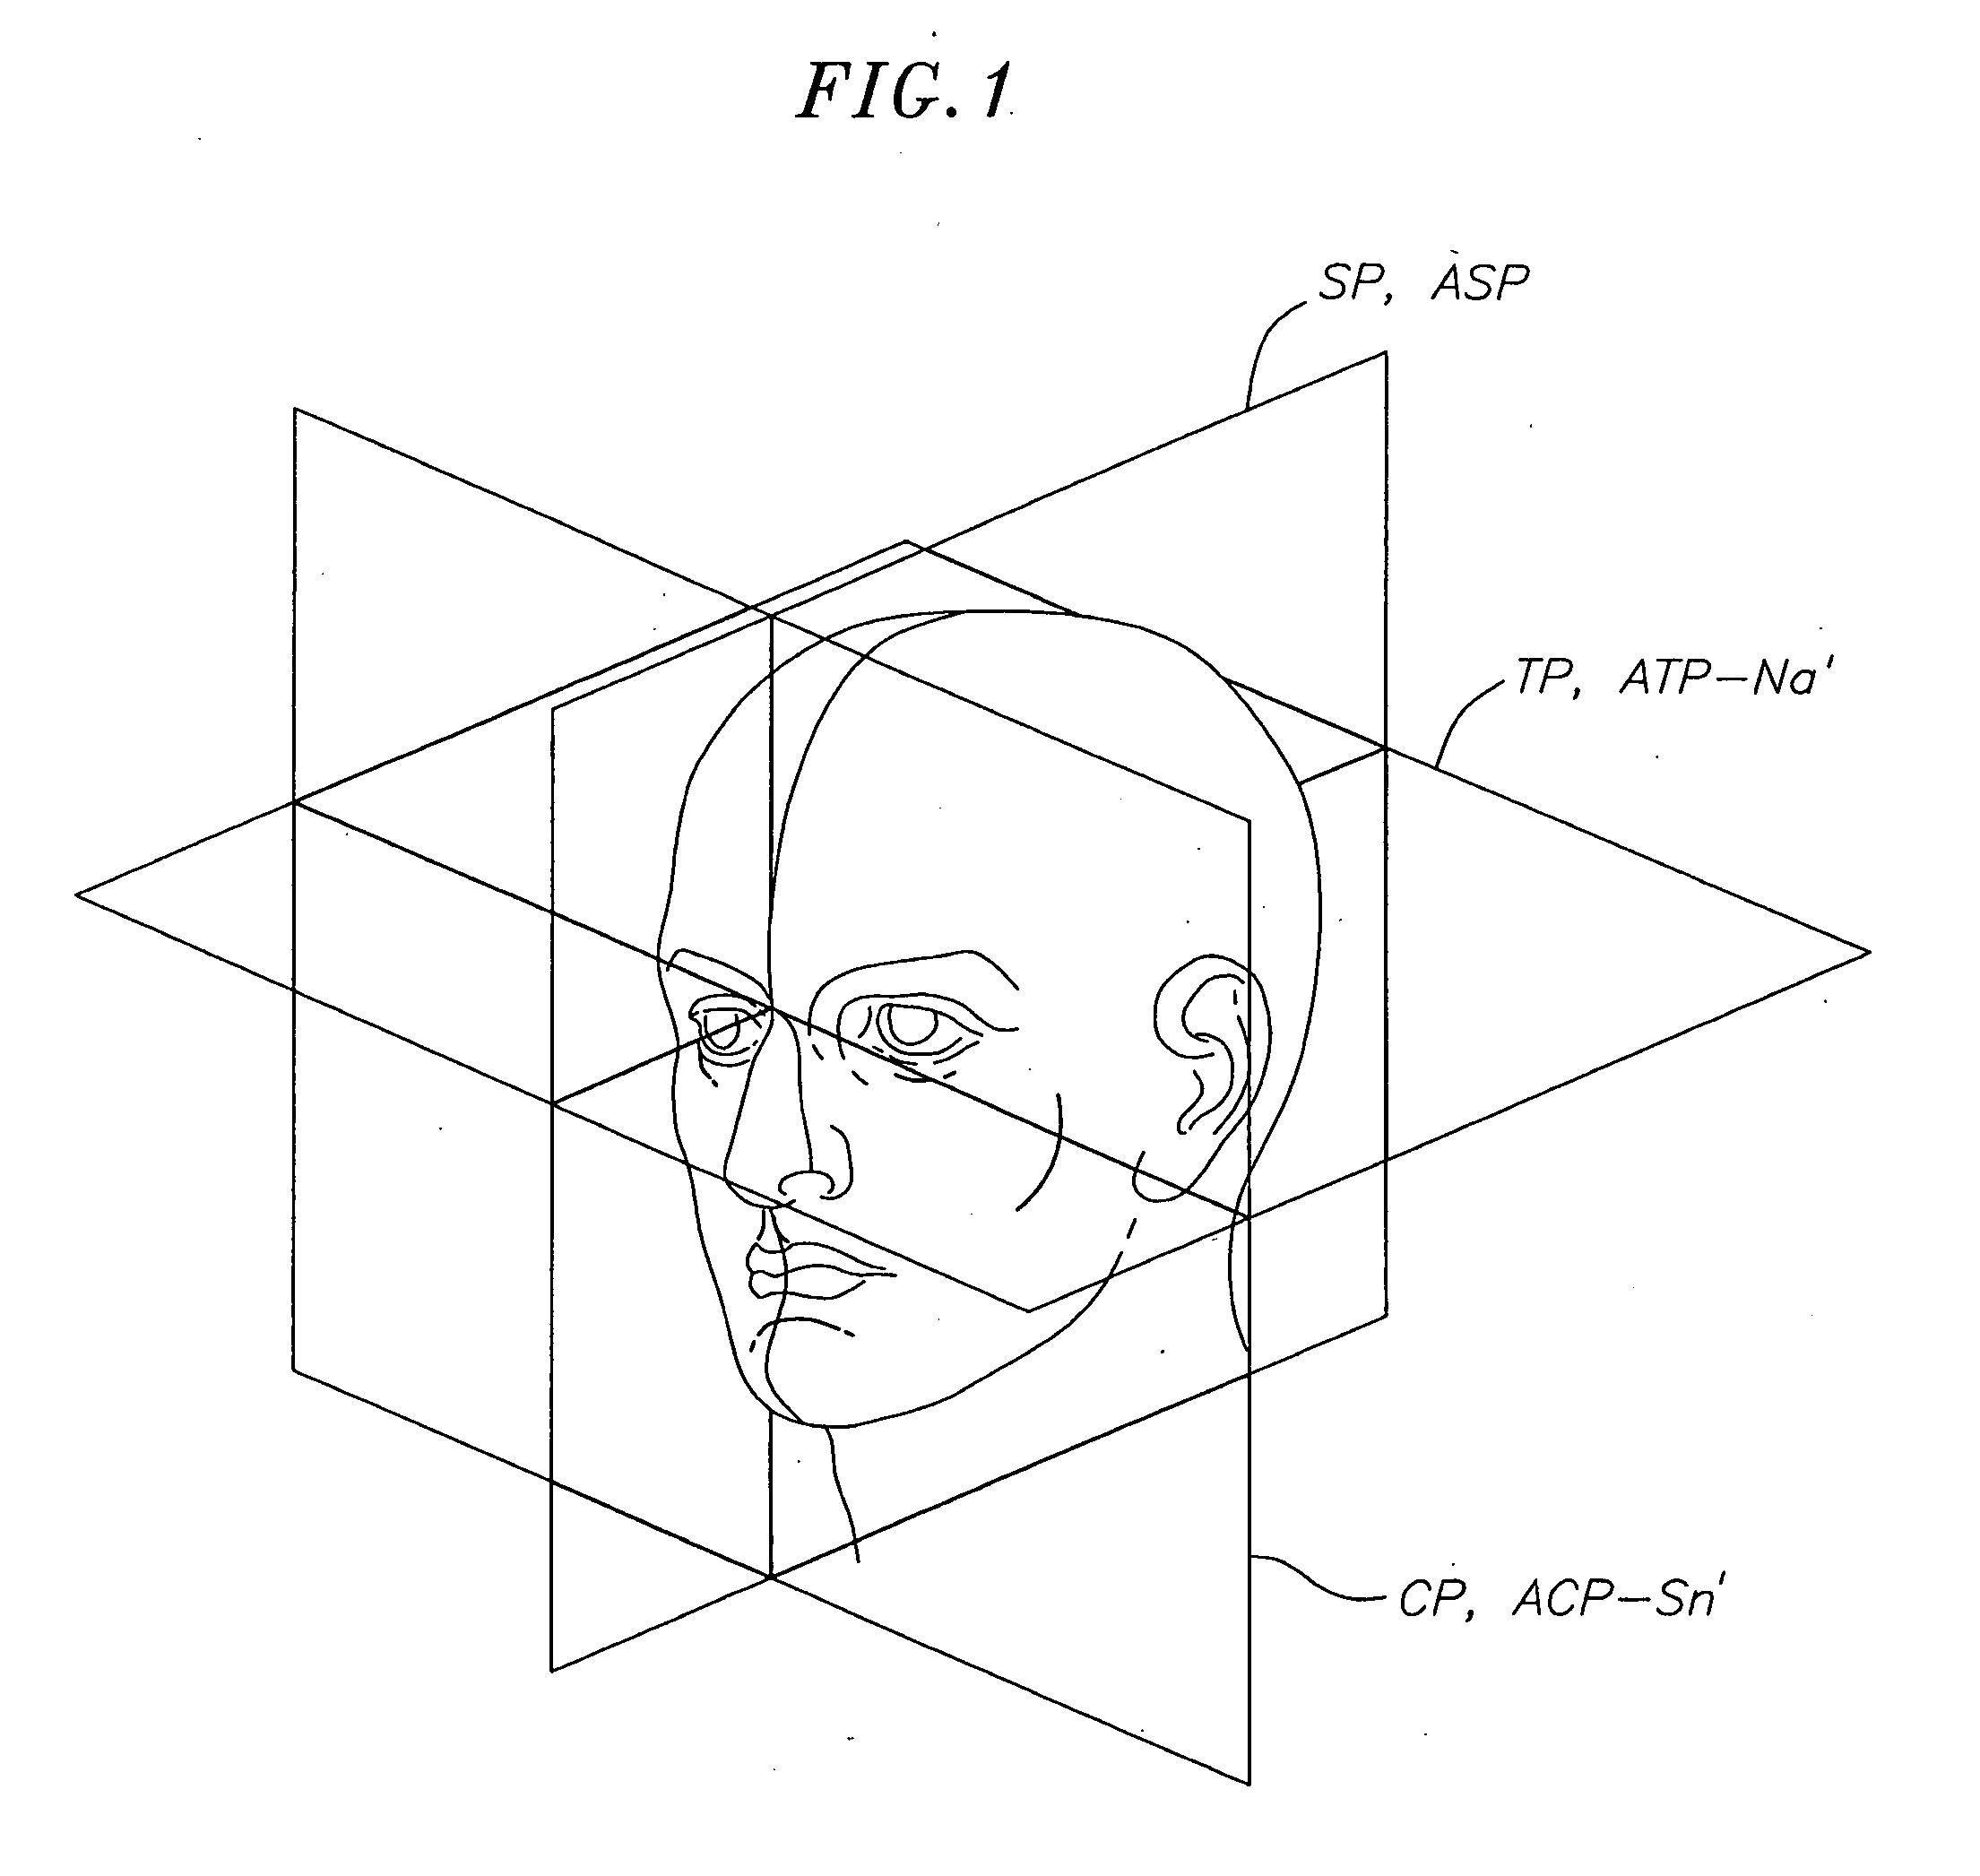 Method for determining the correct natural head position location of references planes relative to a three-dimensional computerized image of a patient's head